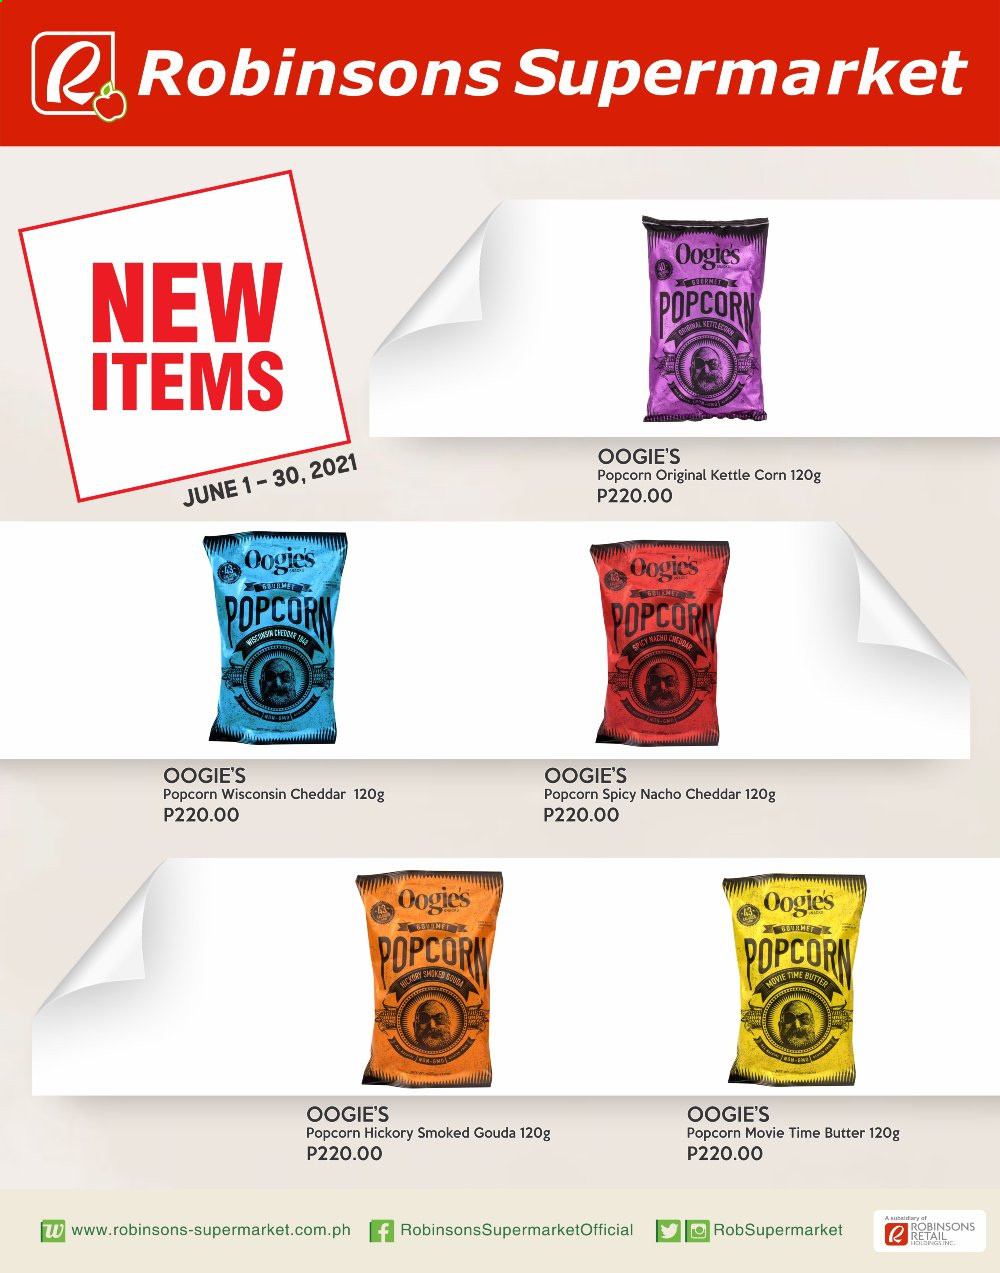 thumbnail - Robinsons Supermarket offer  - 1.6.2021 - 30.6.2021 - Sales products - gouda, cheddar, butter, kettle corn, popcorn. Page 3.